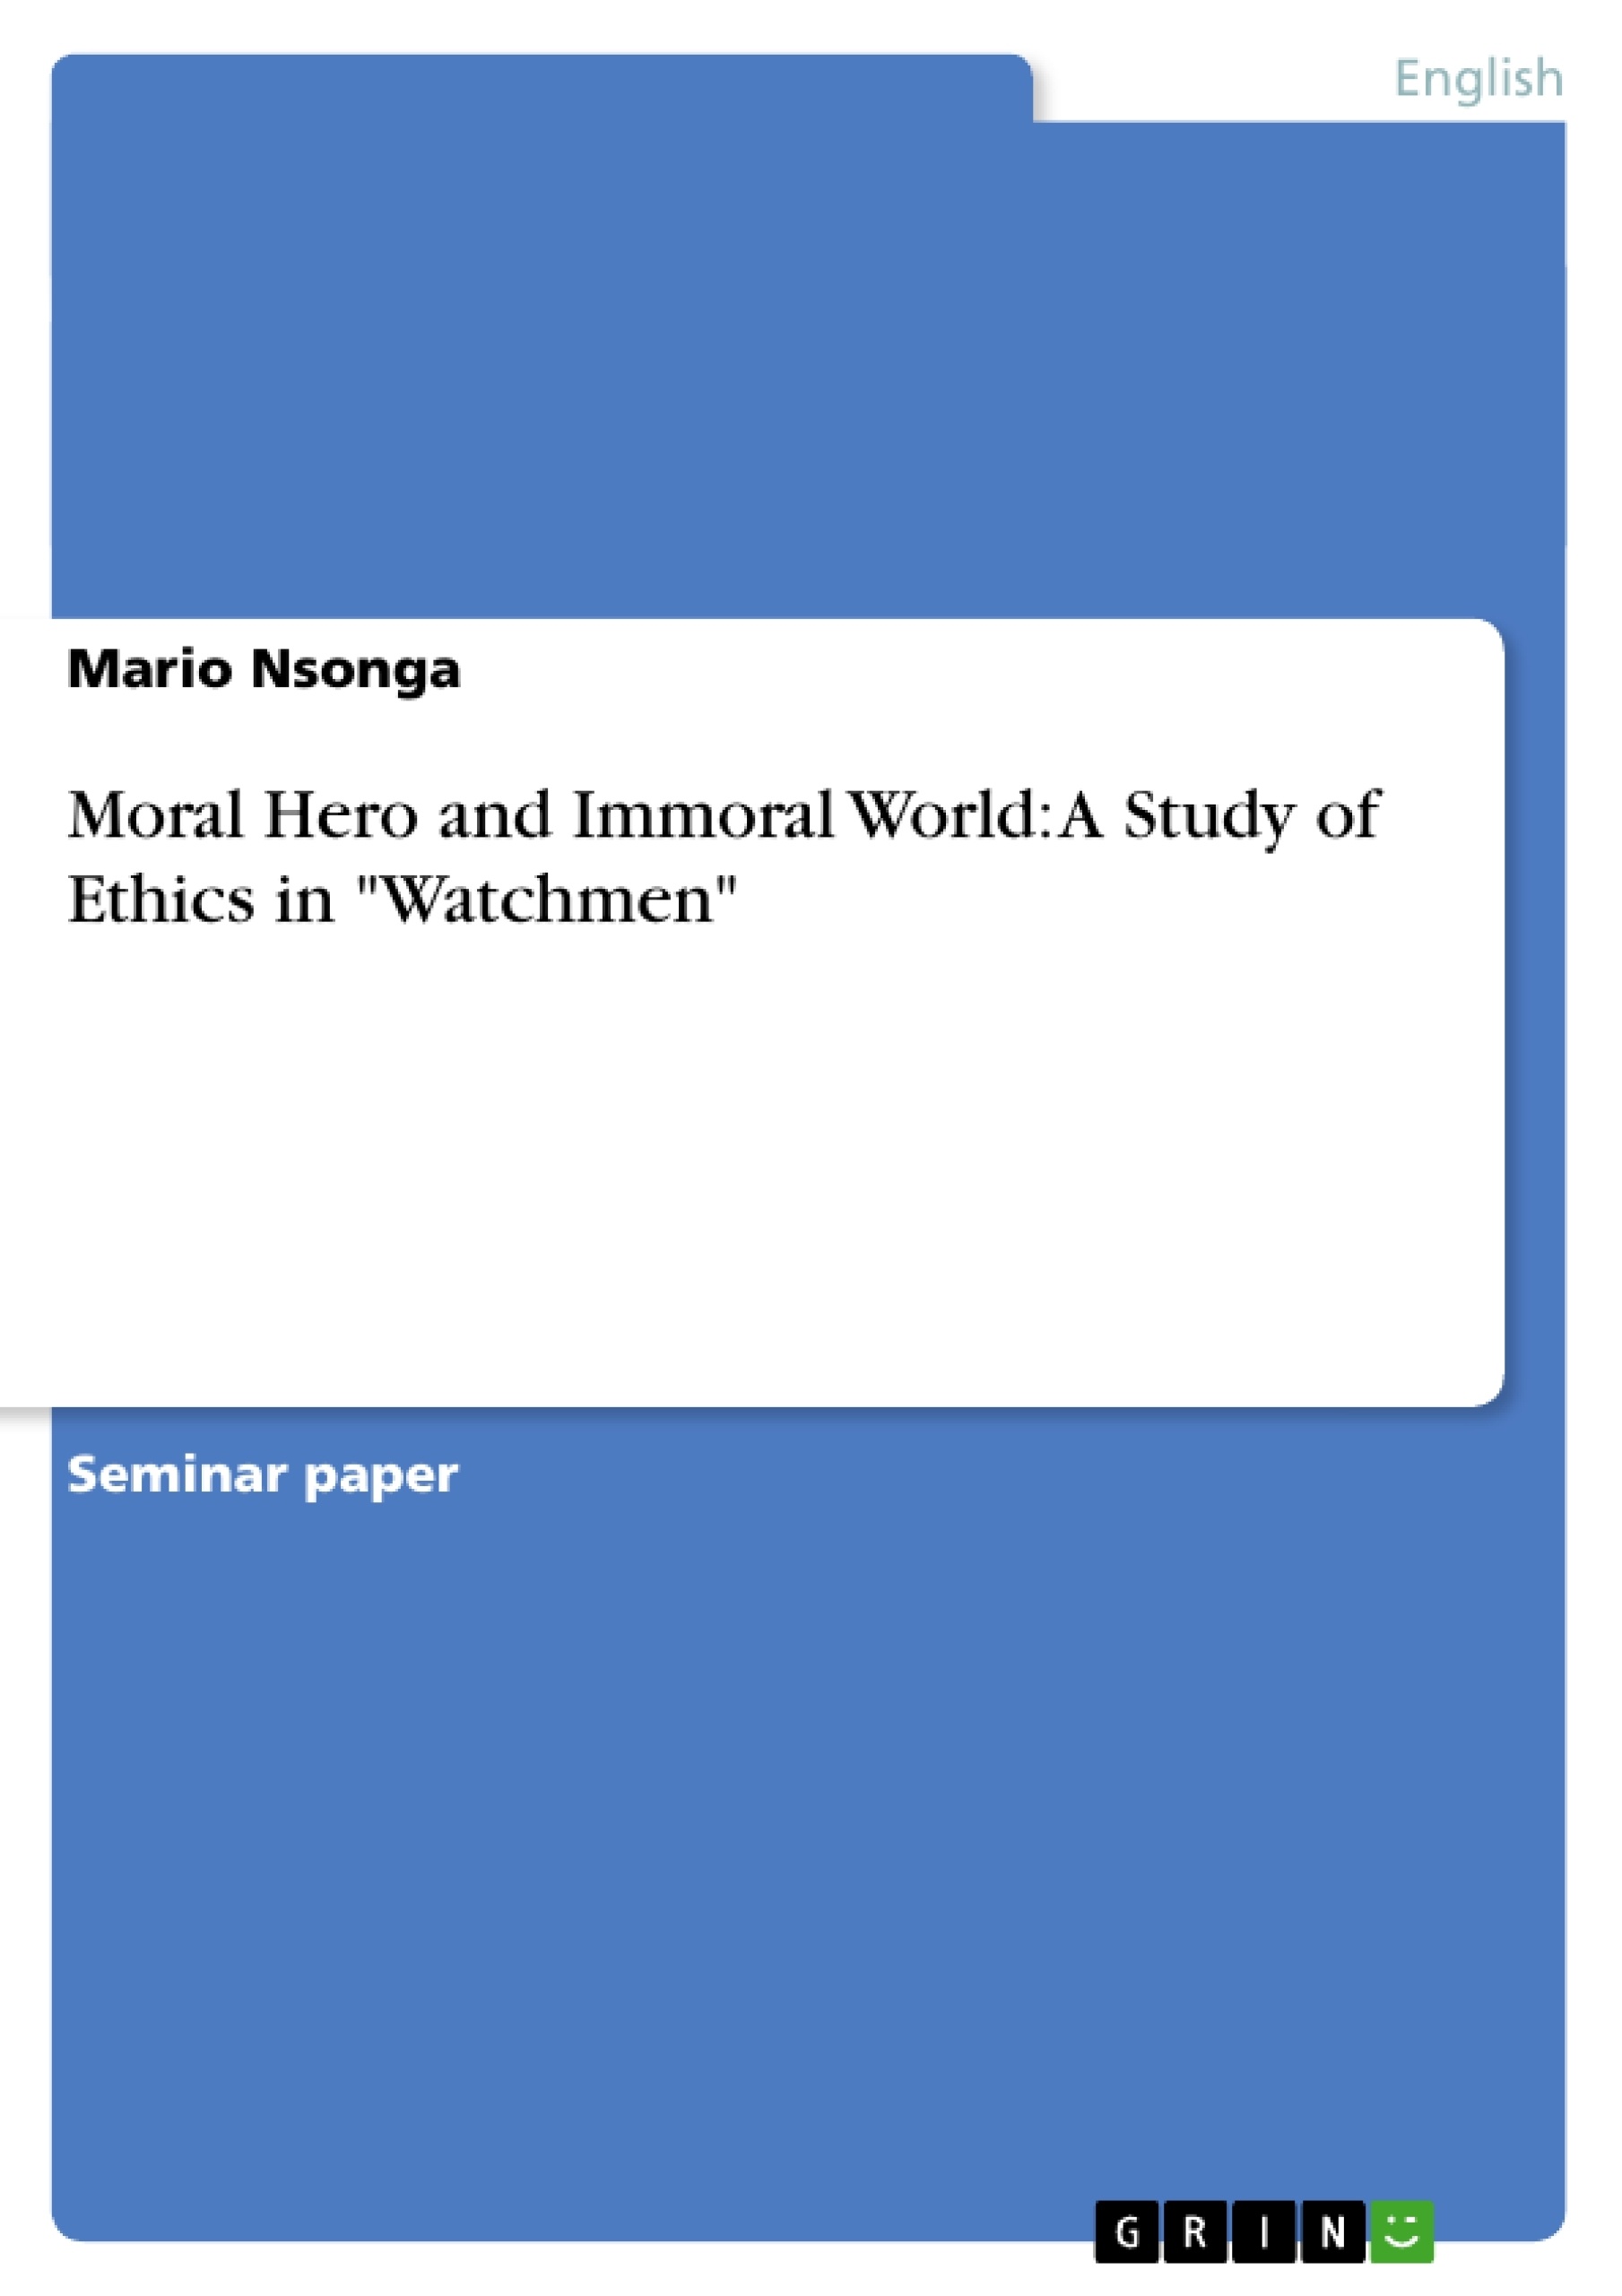 Titre: Moral Hero and Immoral World: A Study of Ethics in "Watchmen"